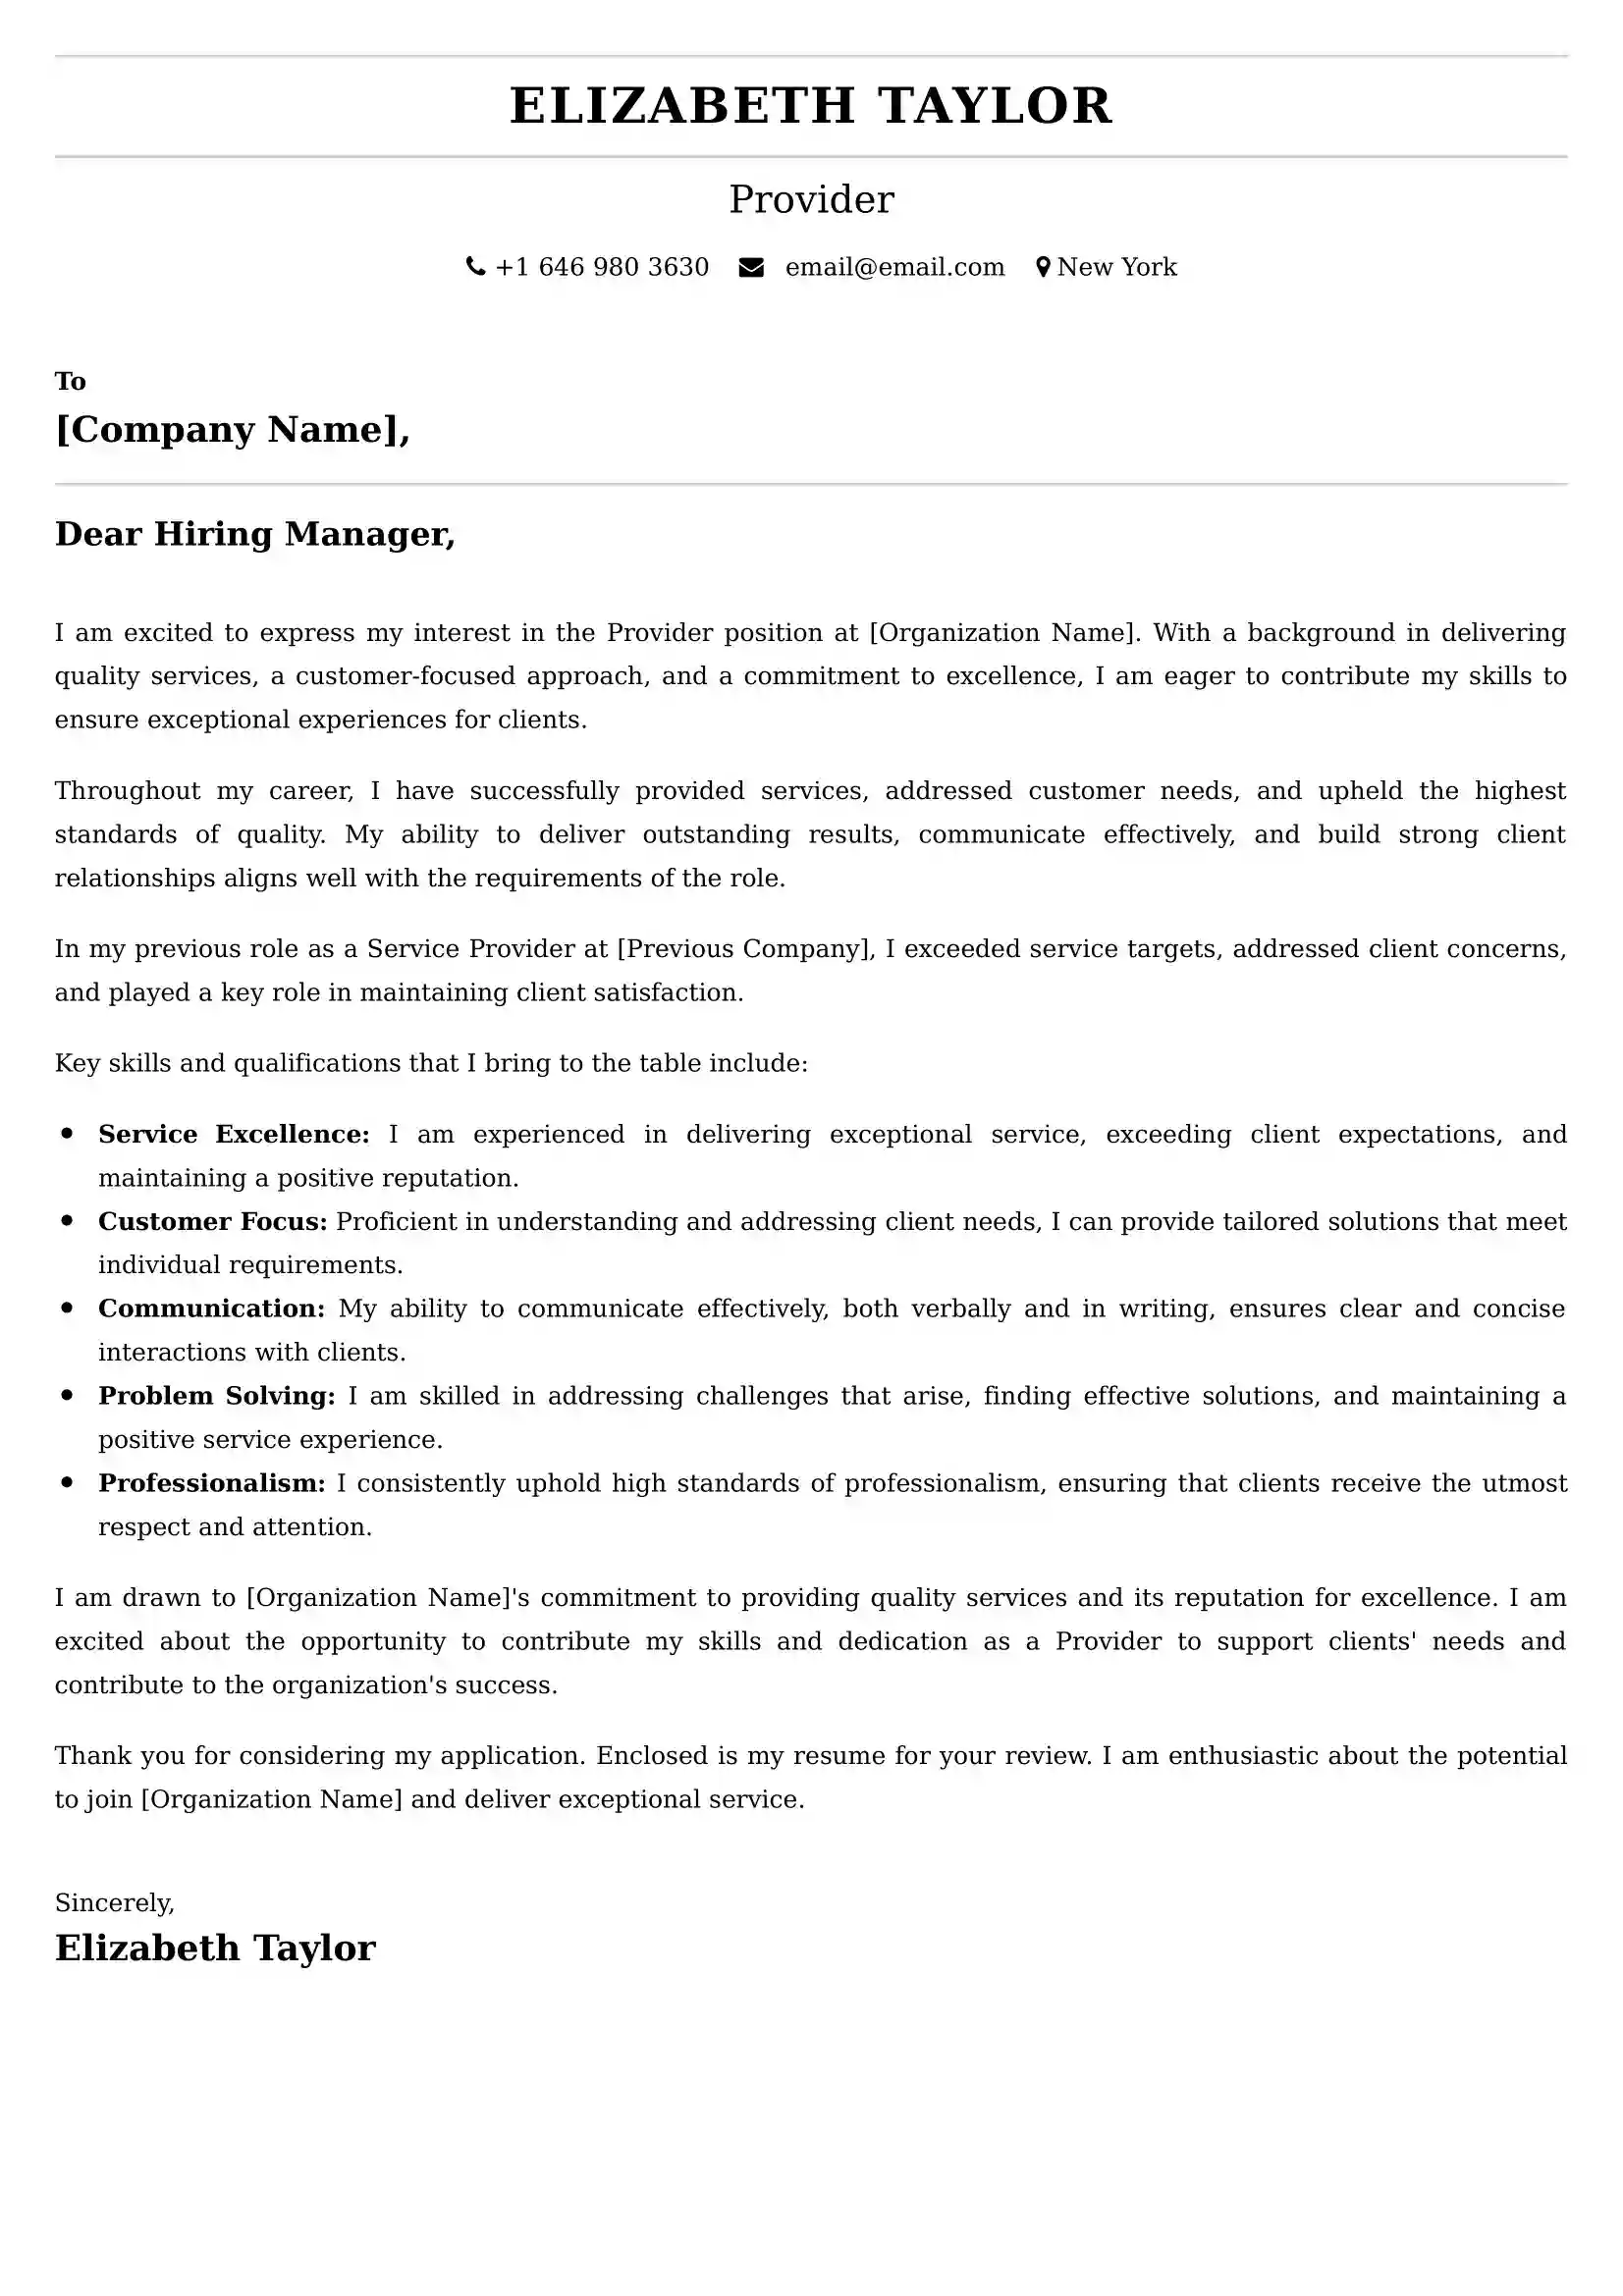 Provider Cover Letter Examples - Latest UK Format